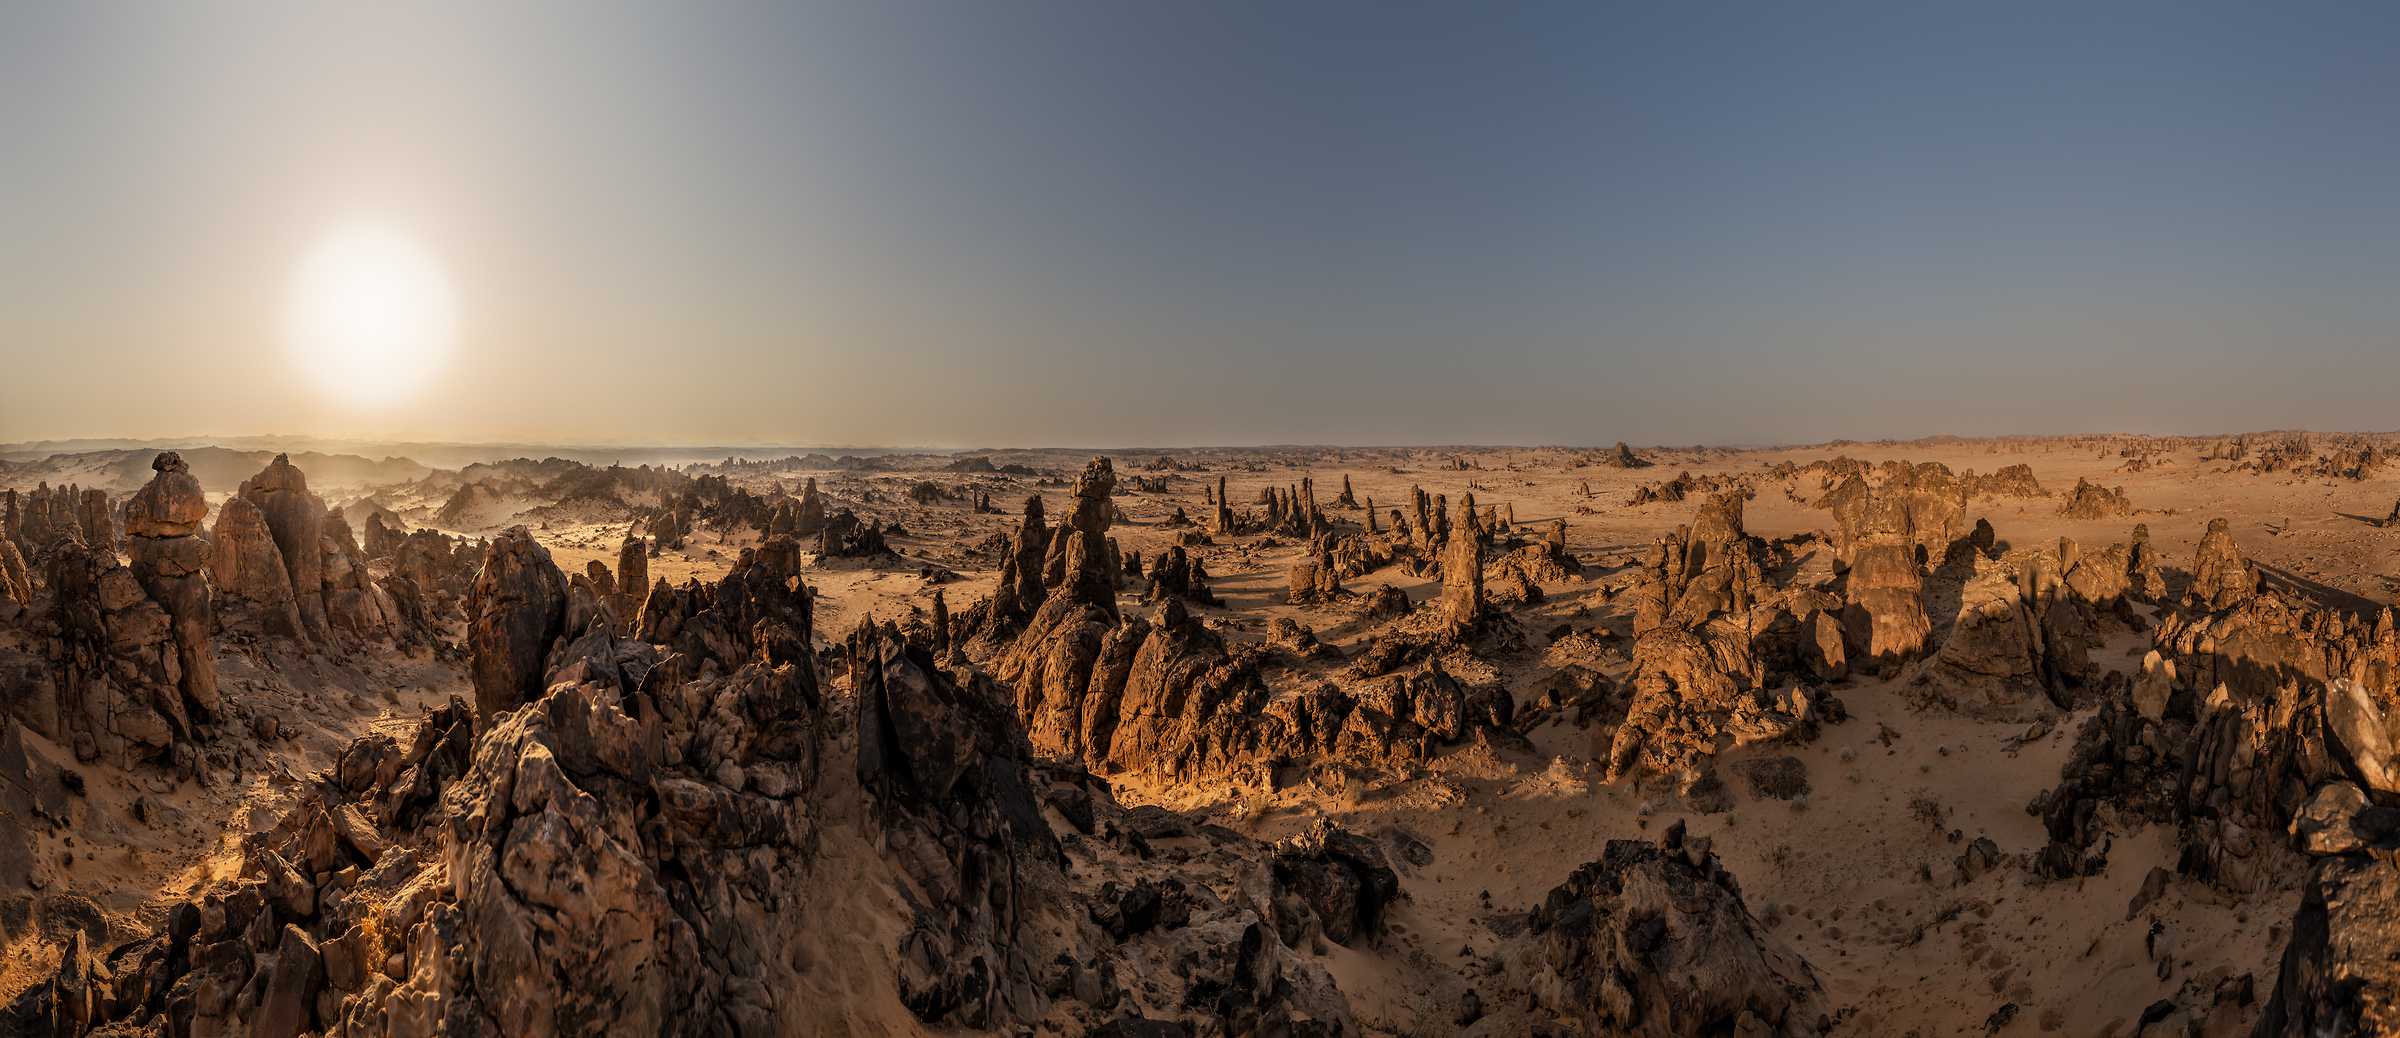 727 megapixels! A very high resolution, large-format VAST photo print of the Arabian Desert; landscape photograph created by Peter Rodger in Al Ula, Saudi Arabia.